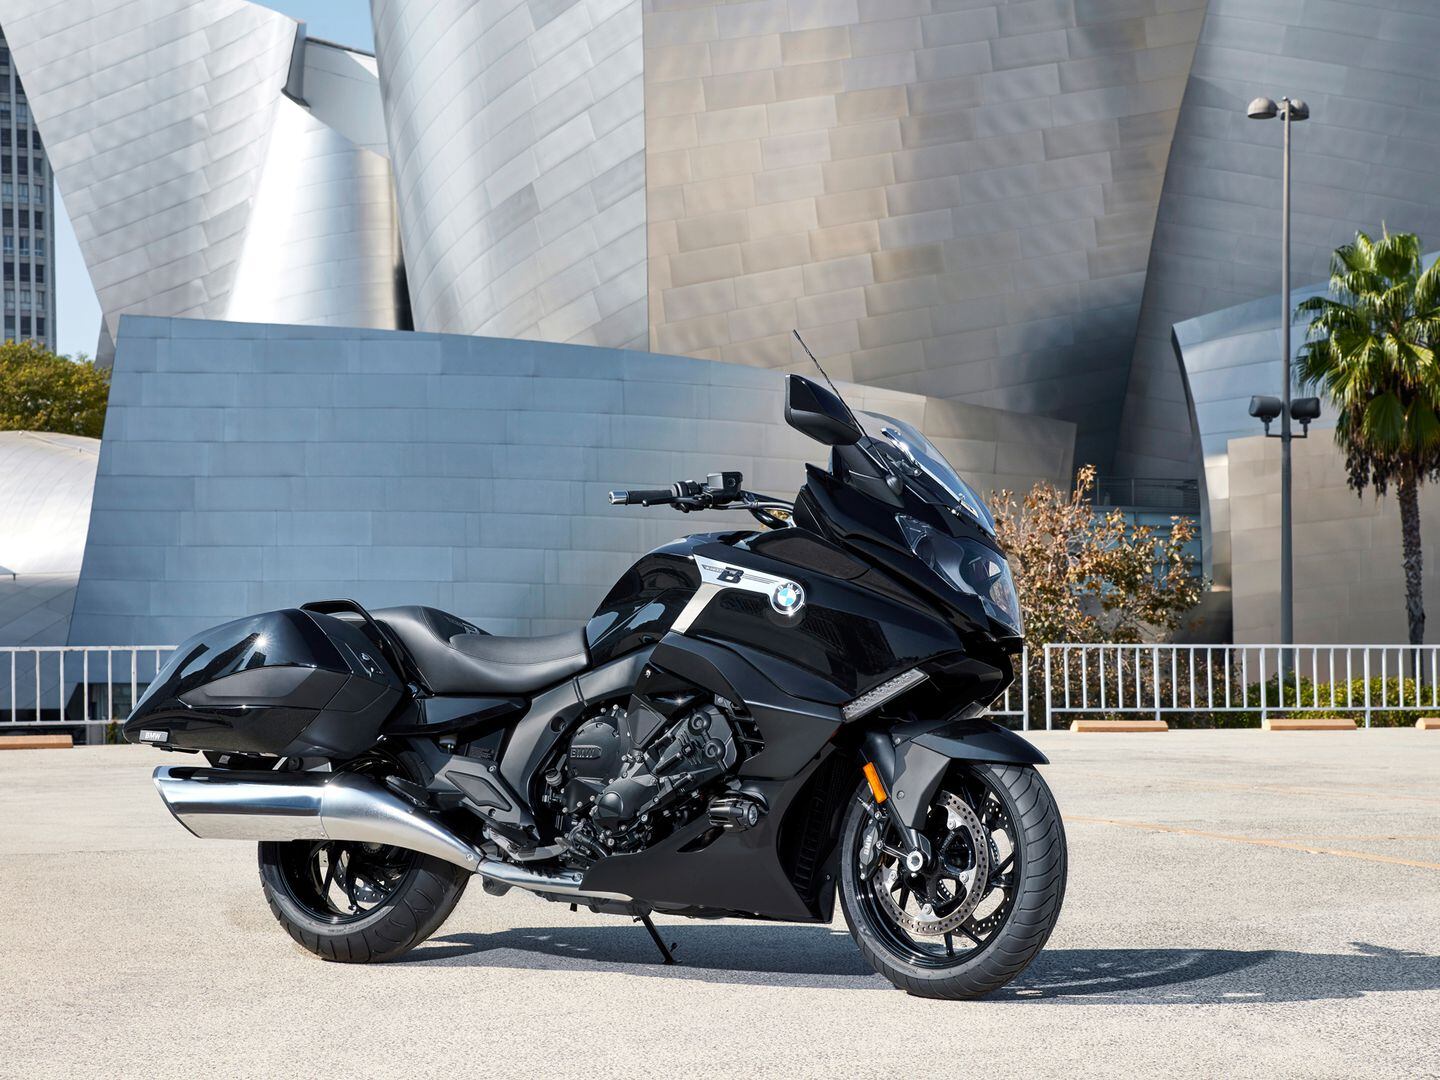 BMW to Offer Test Rides on New Bagger at Buffalo Chip | Motorcycle Cruiser